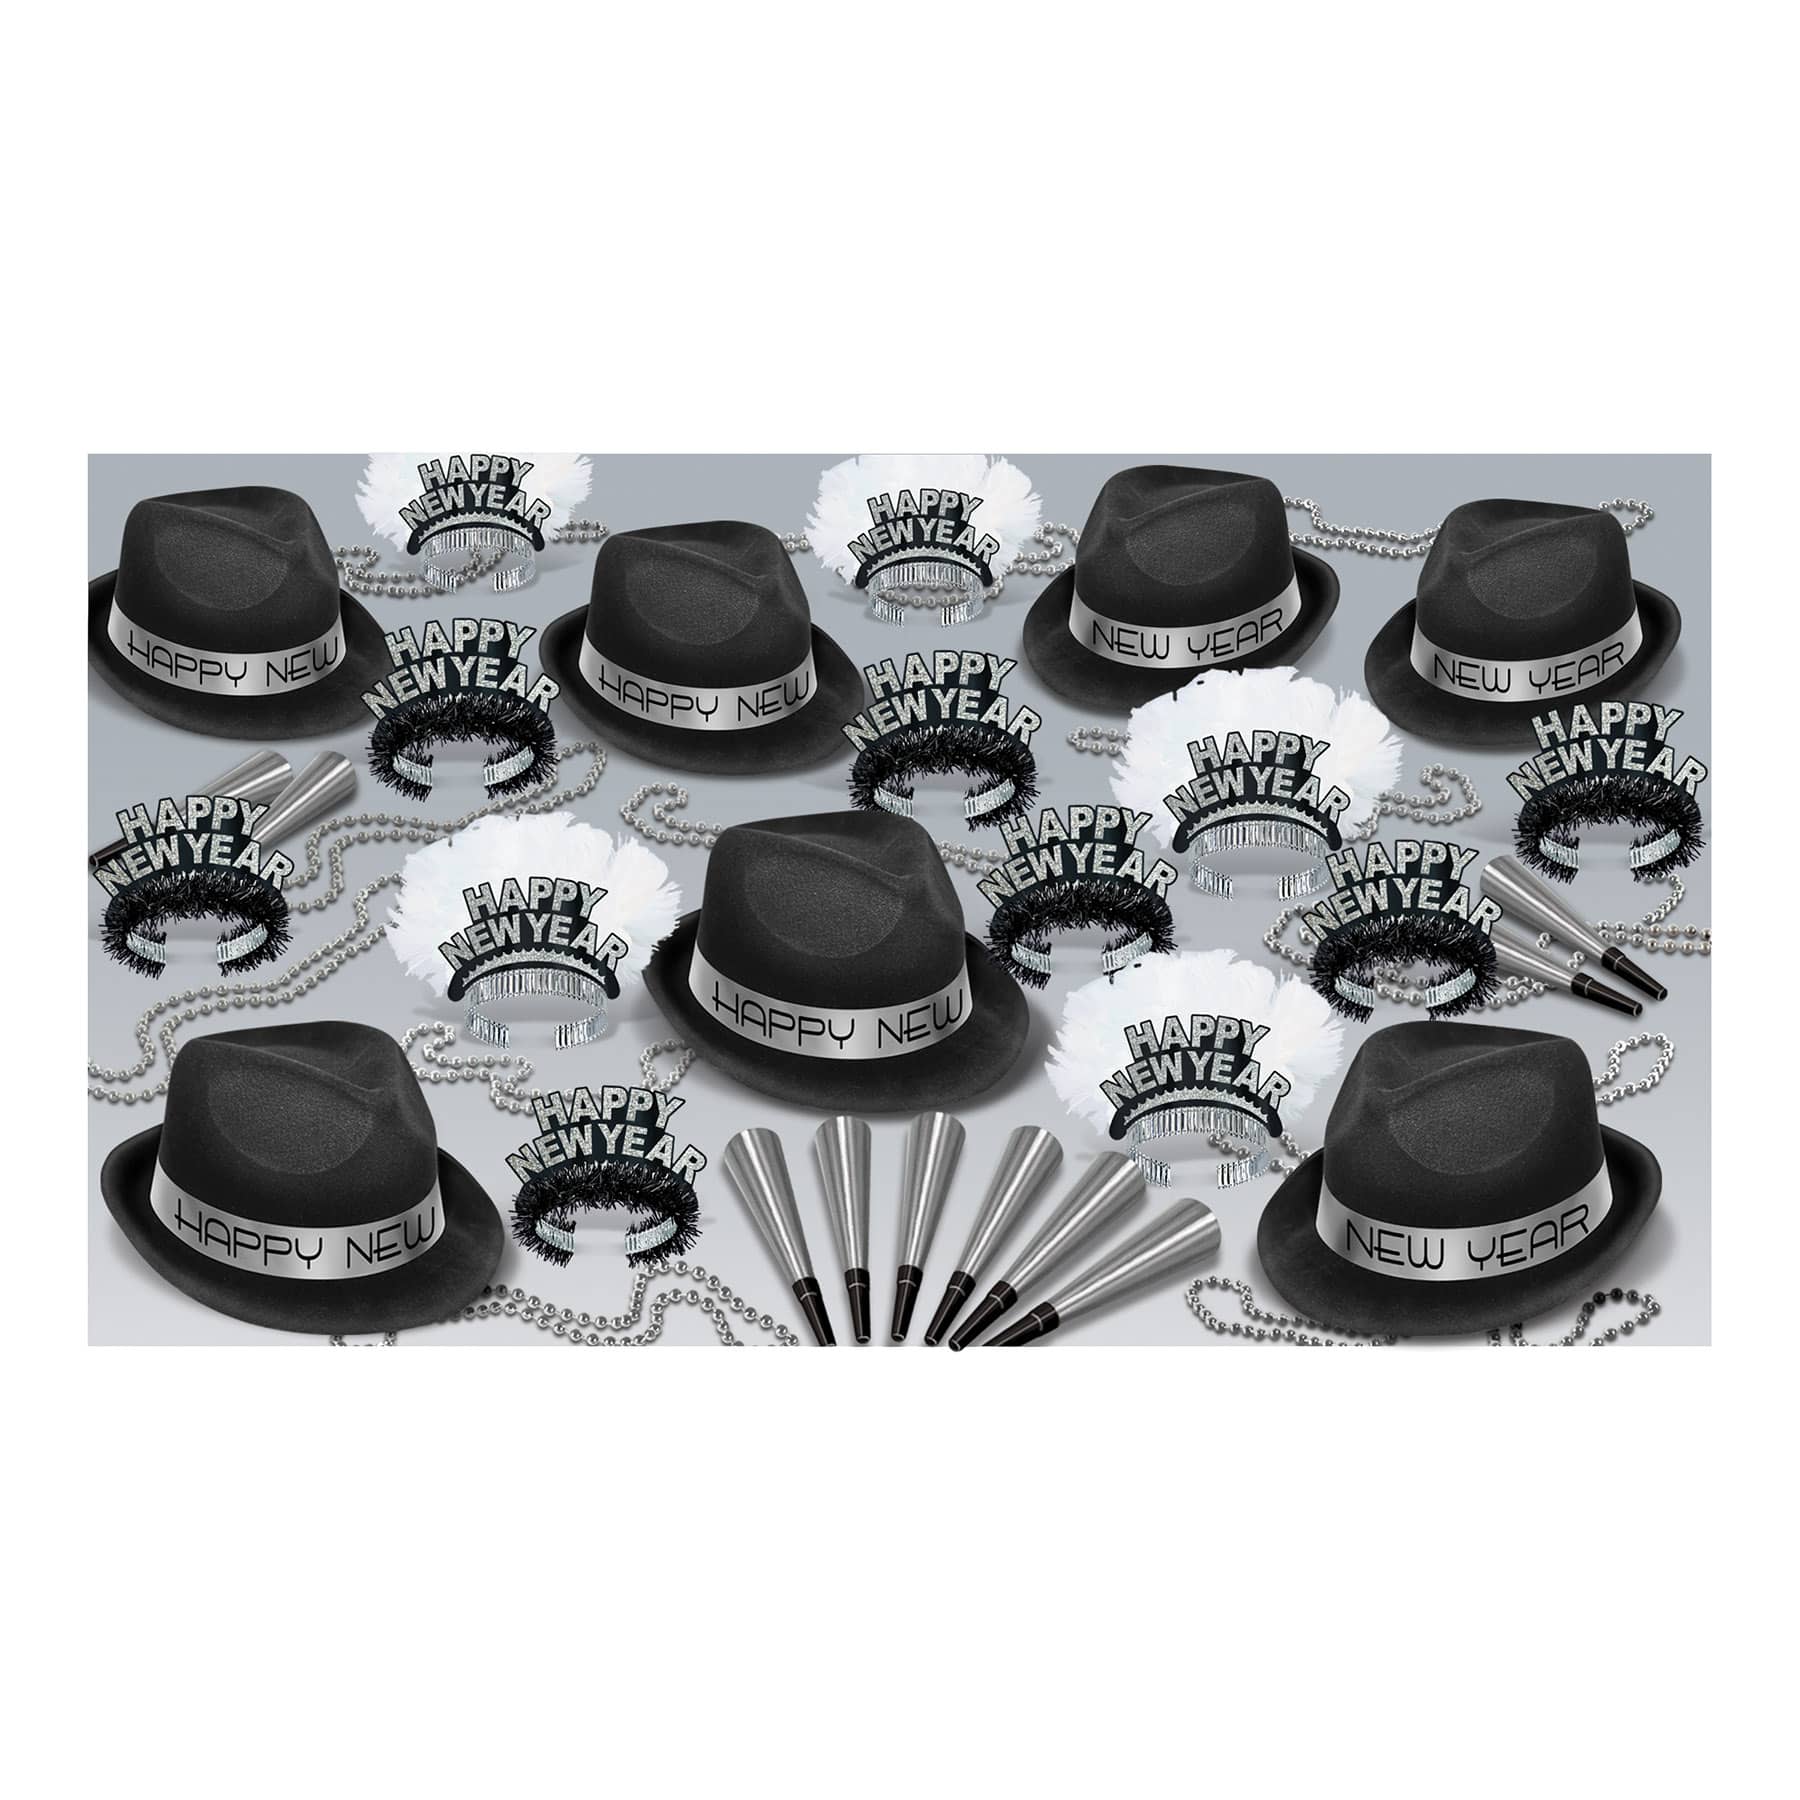 Chairman Silver Assortment for 50